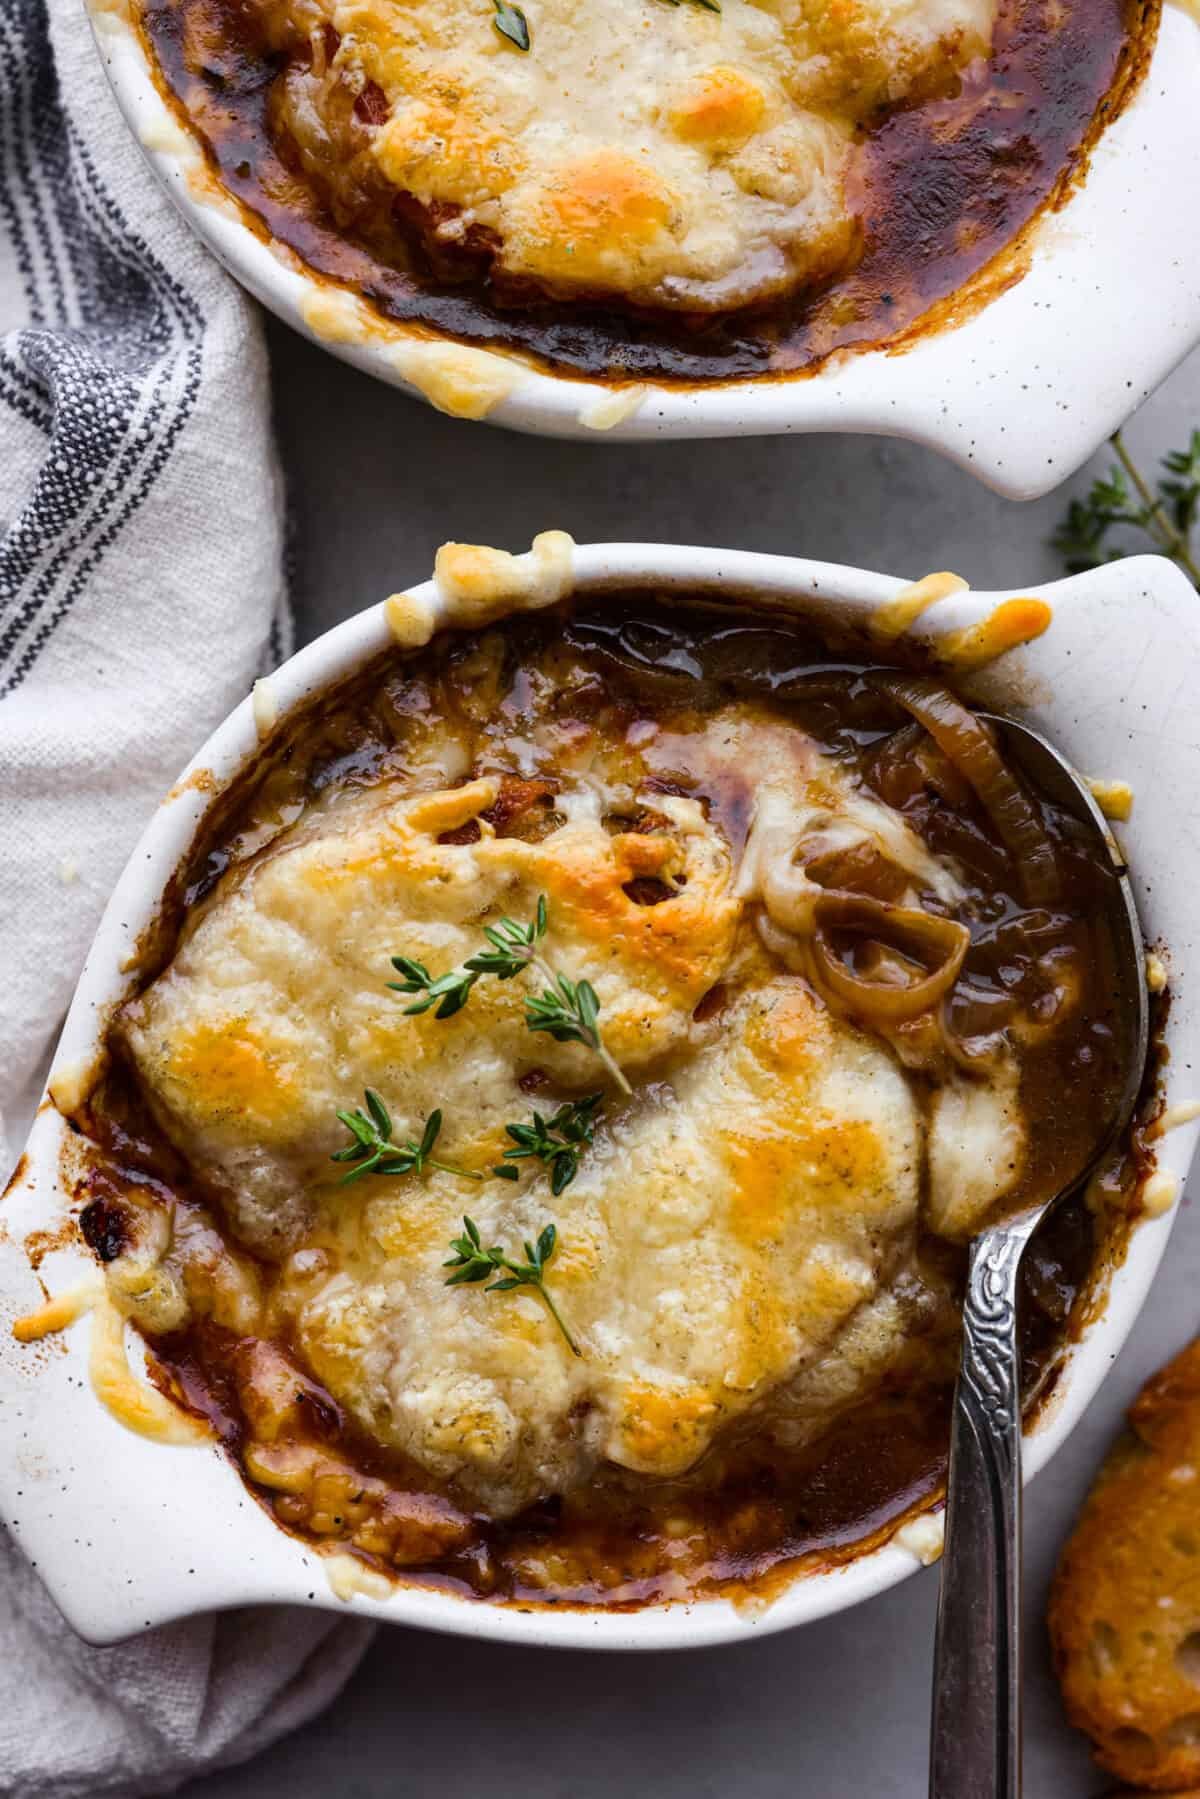 Top-down view of a bowl of French onion soup, topped with melted gruyere cheese.